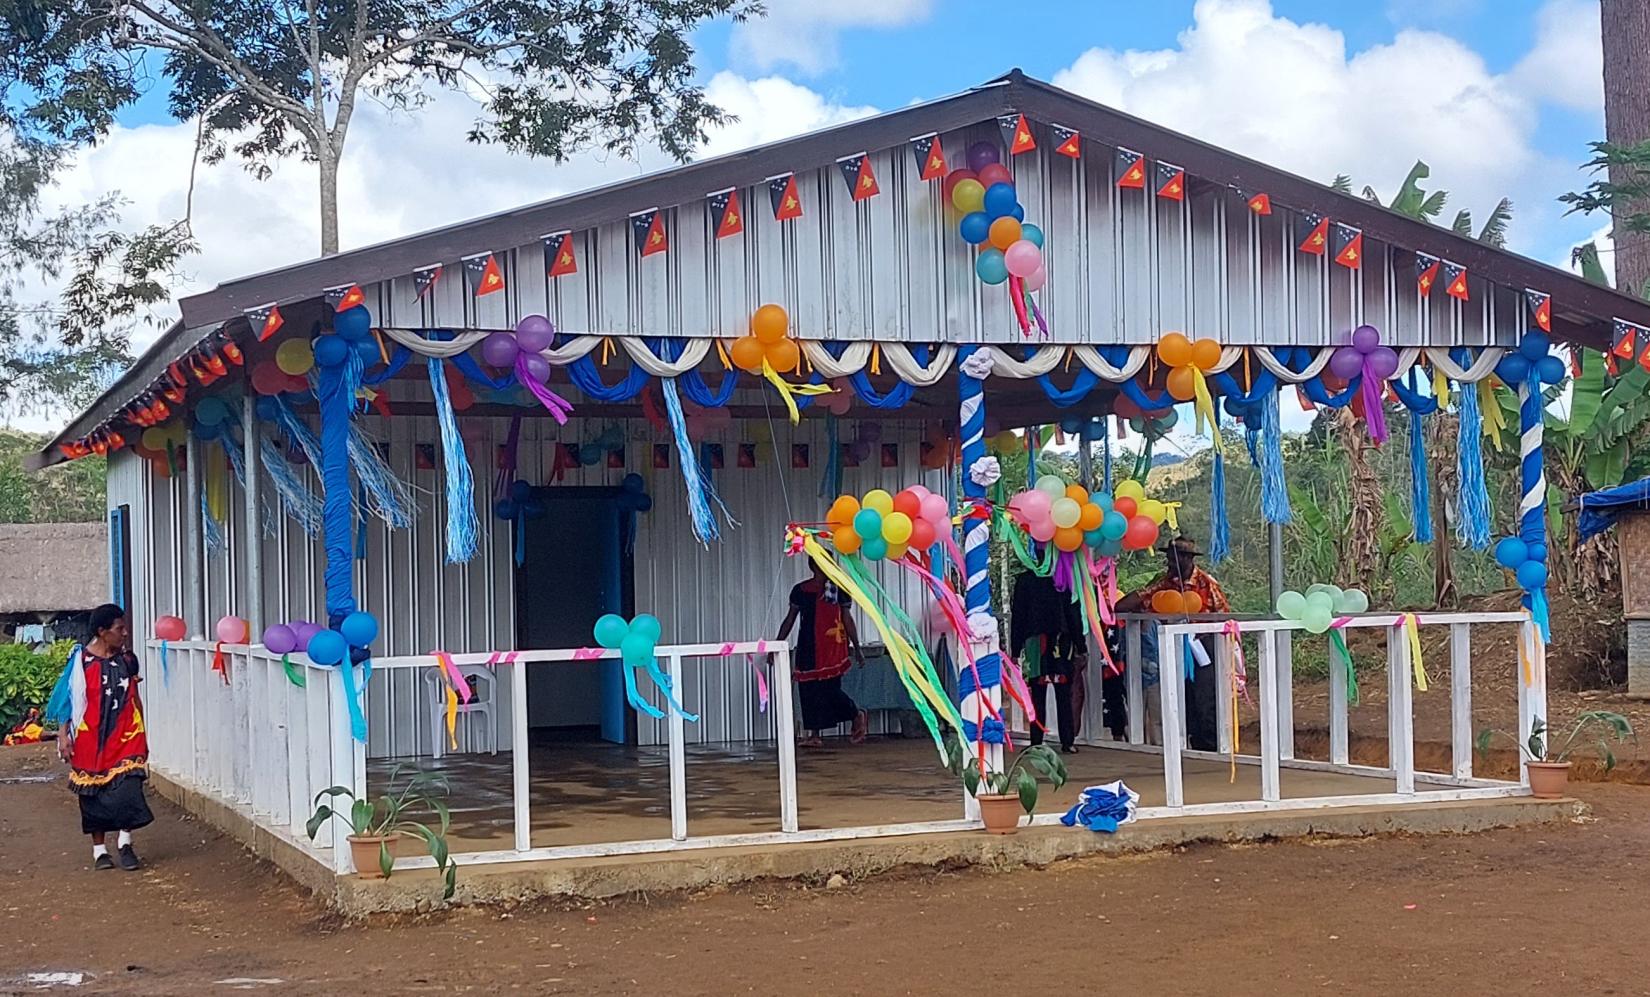 Community Resource Centre built with the support of IOM and UN PBF 